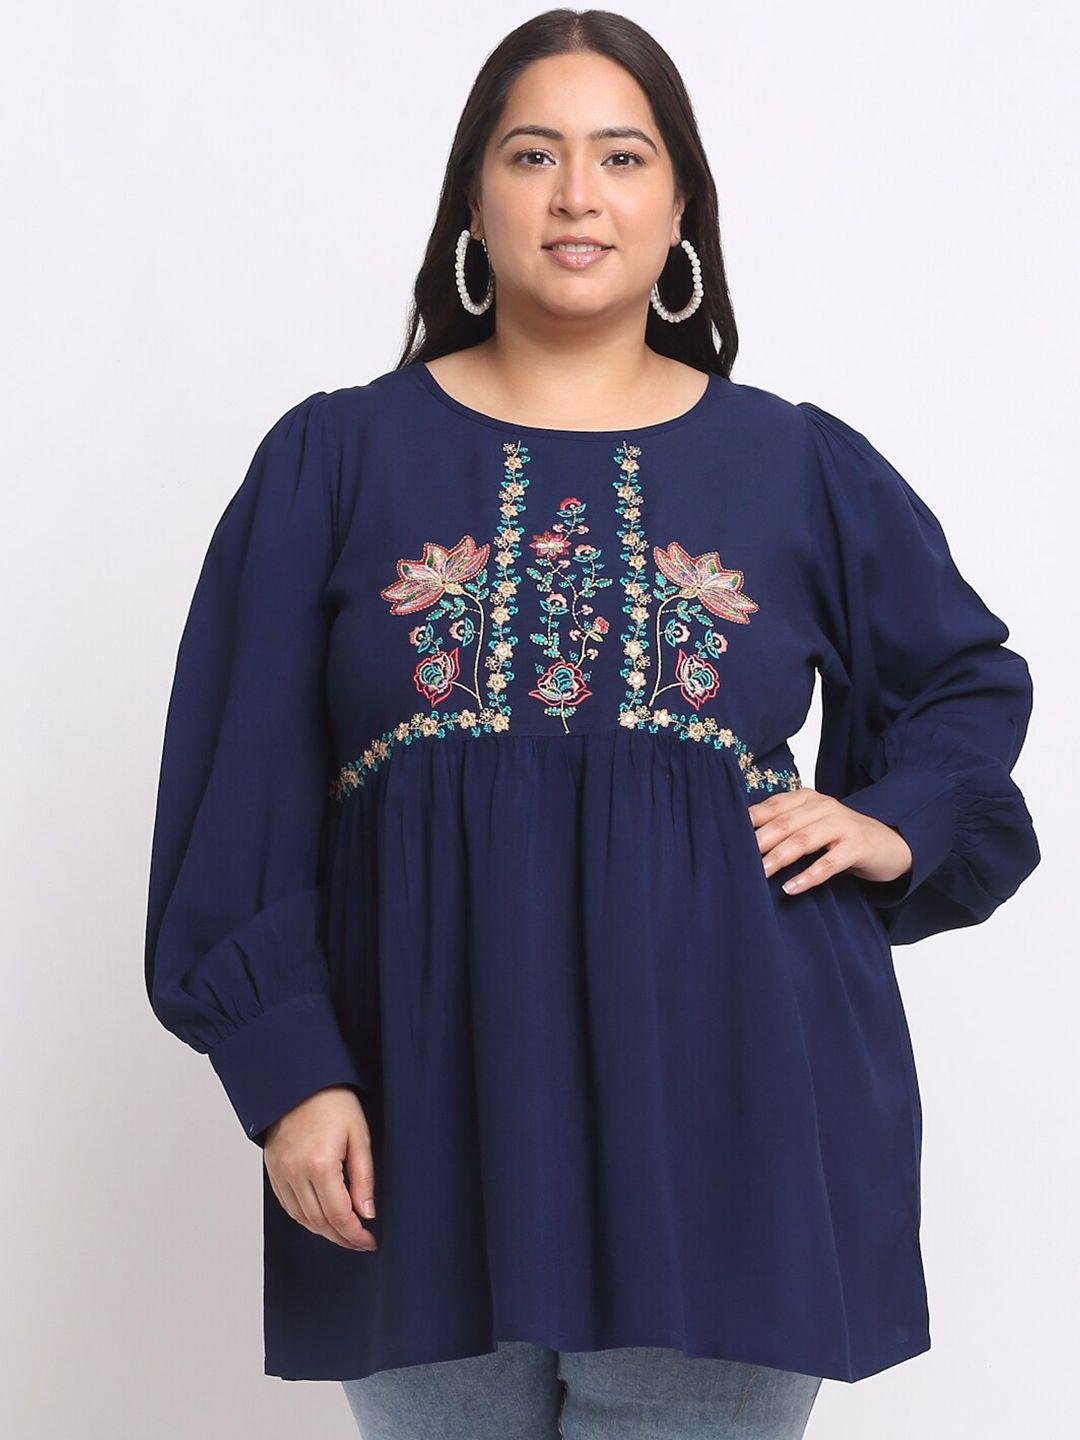 pluss plus size floral embroidered top